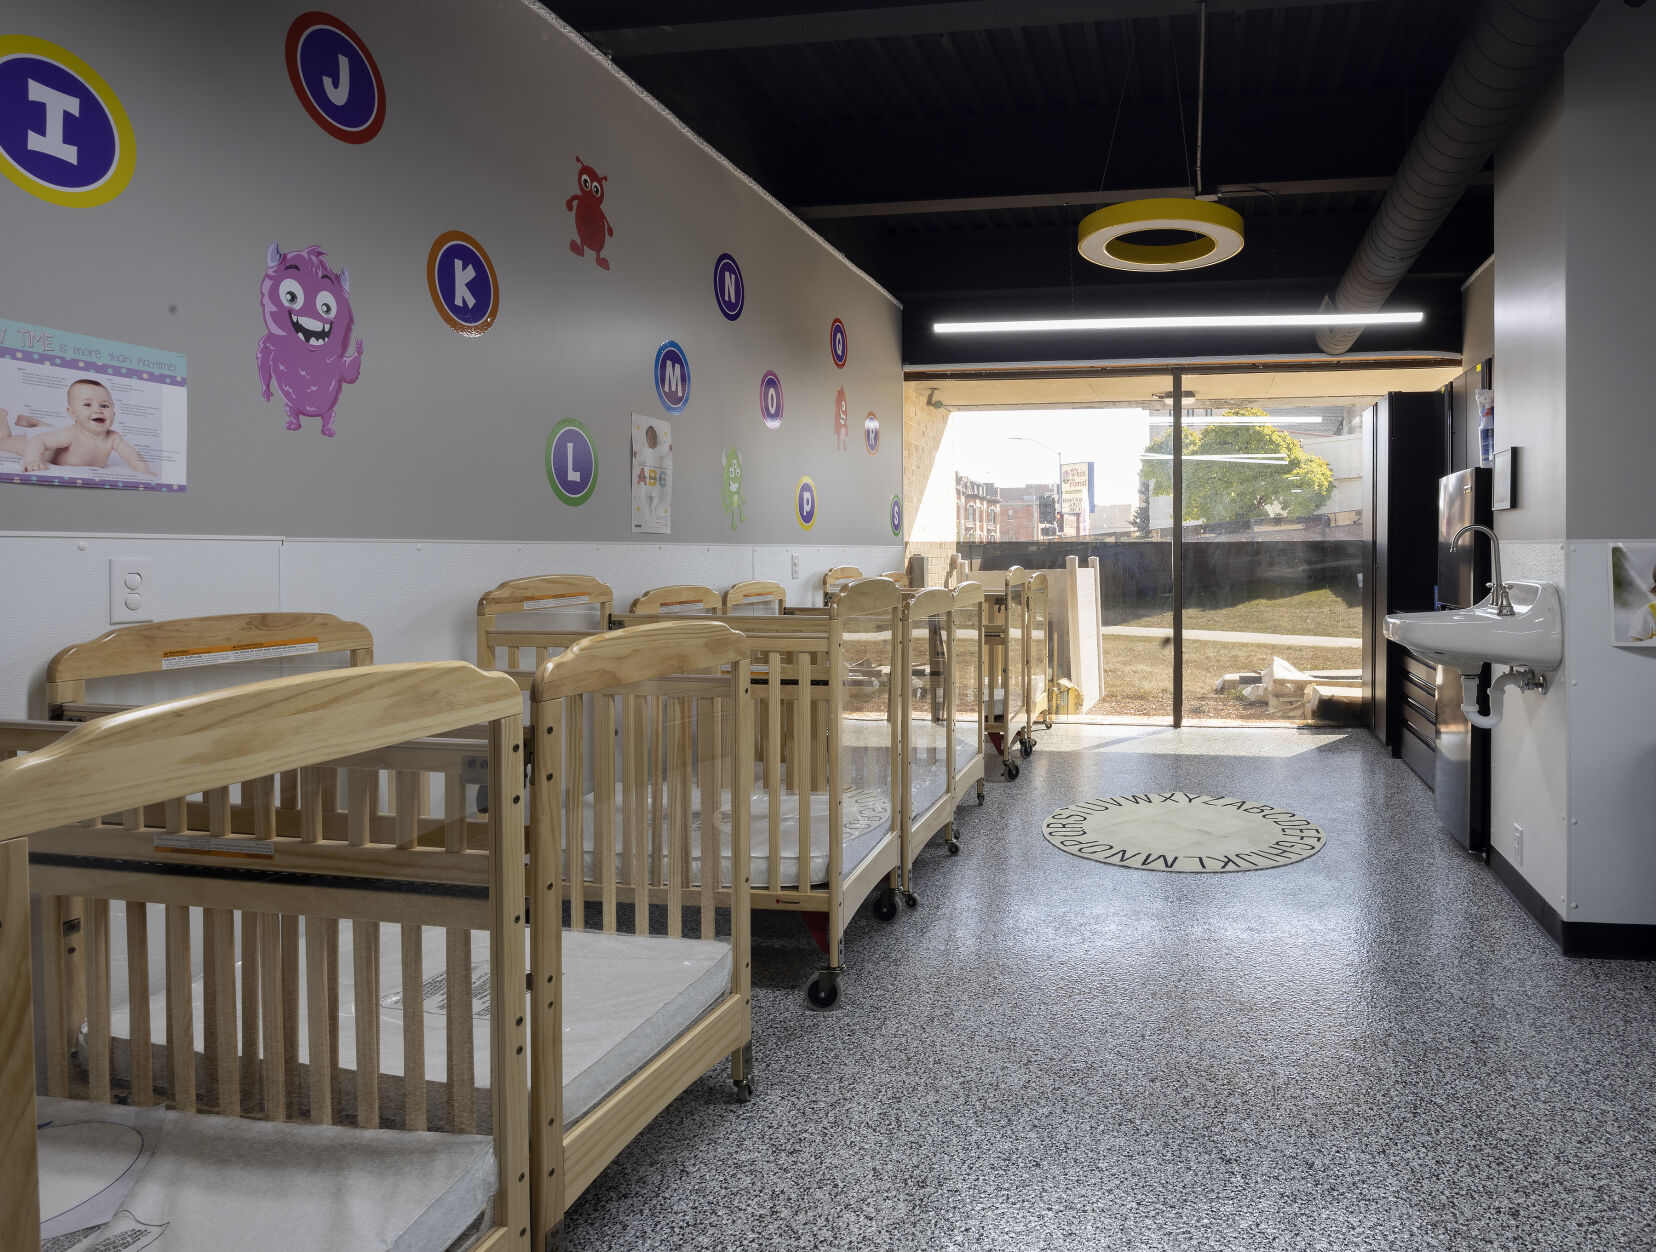 Interior at the new Romper Room Childcare Center on Main Street in Dubuque on Friday, Oct. 21, 2022.    PHOTO CREDIT: Stephen Gassman